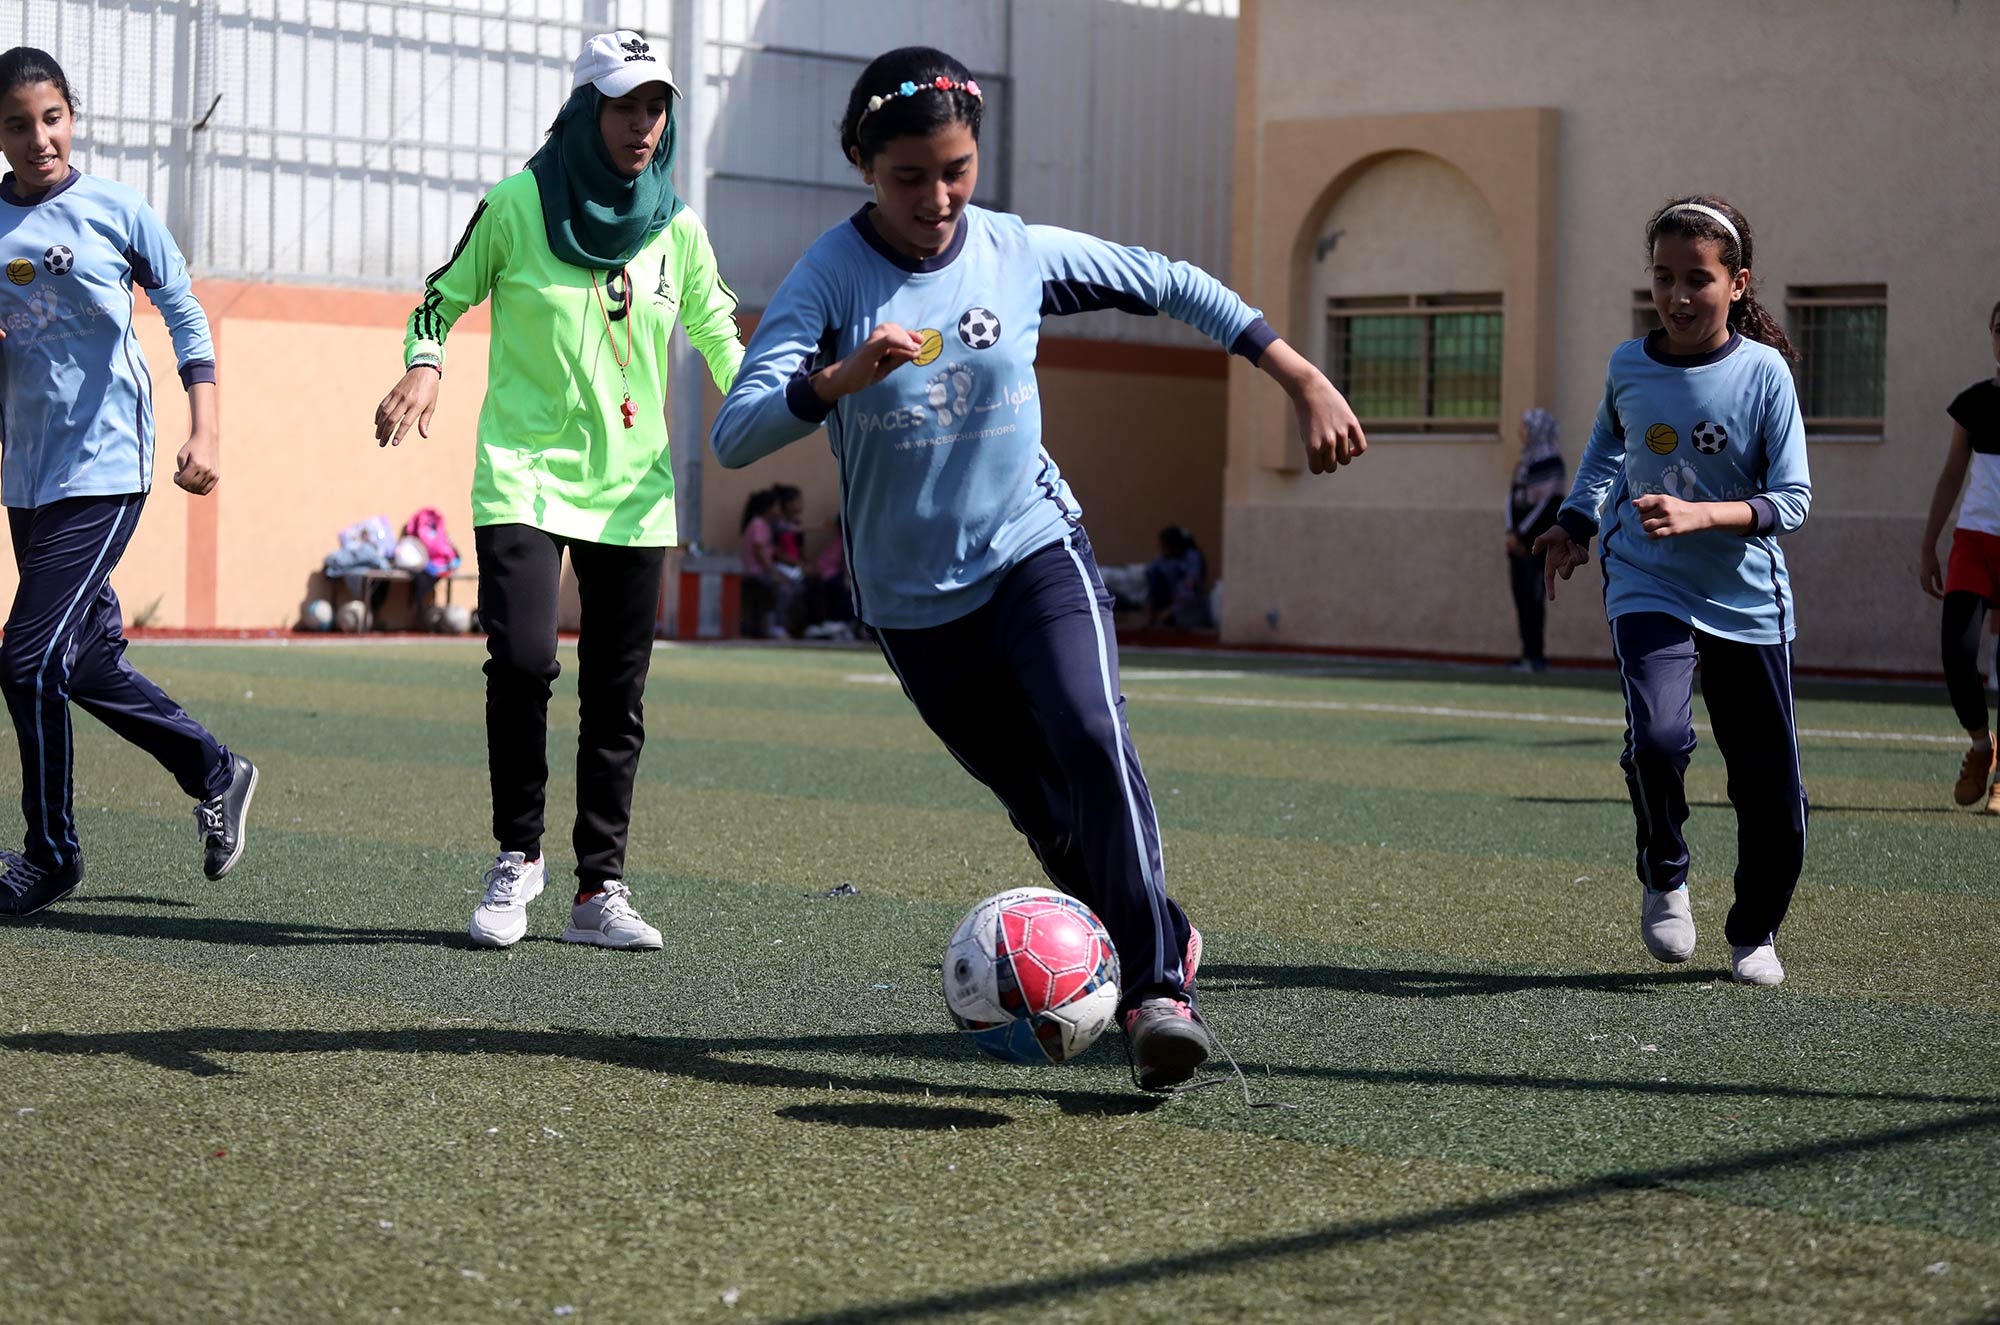 A member of the girls sports team makes a run with the ball.